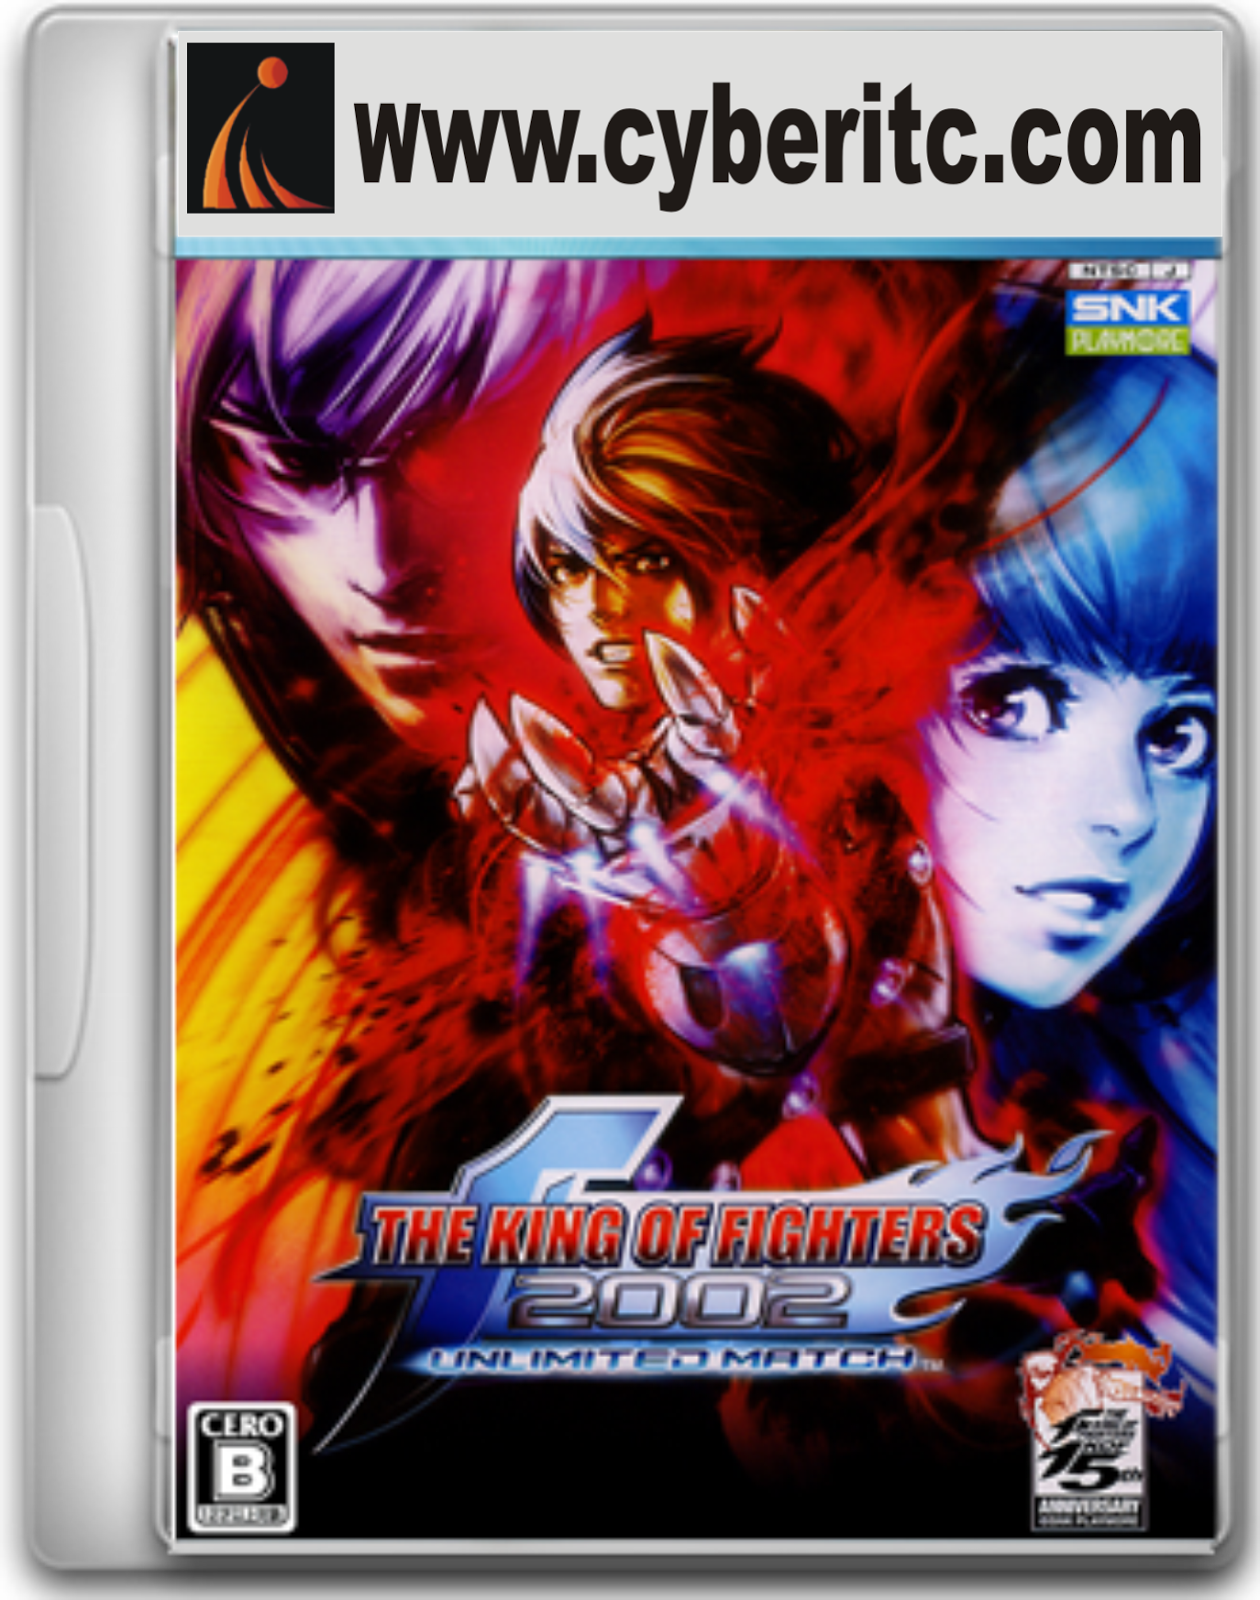 Опасные игры 2002. The King of Fighters 2002. The King of Fighters 2002 ps2. King of Fighters ps2. PLAYSTATION 2 King of Fighters.